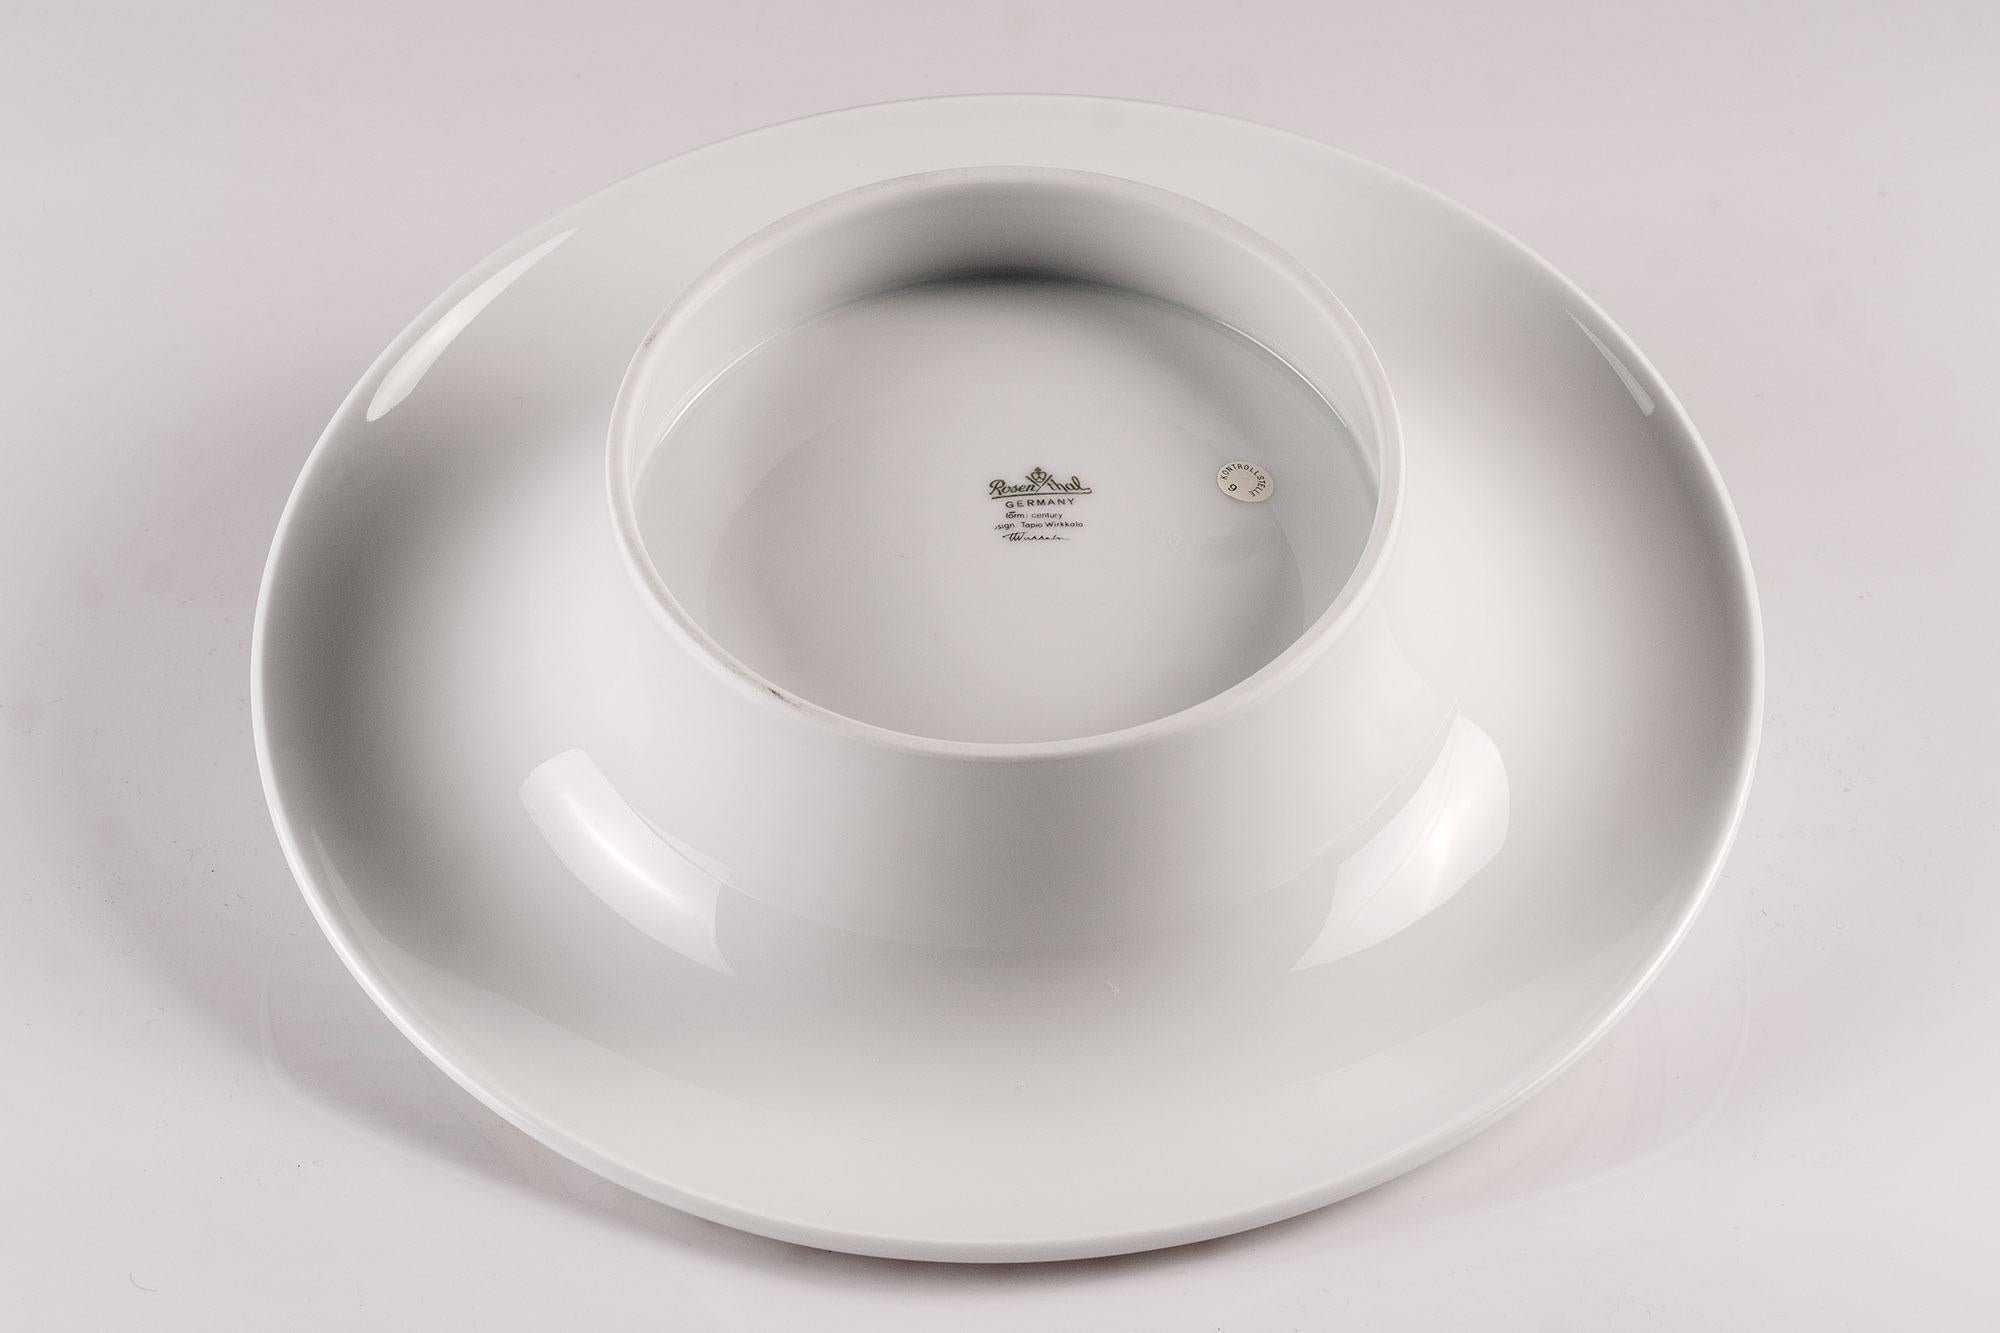 Porcelain Bowl / Centerpiece by Tapio Wirkkala and Dorothy Hafner for Rosenthal In Excellent Condition For Sale In Lugano, TI